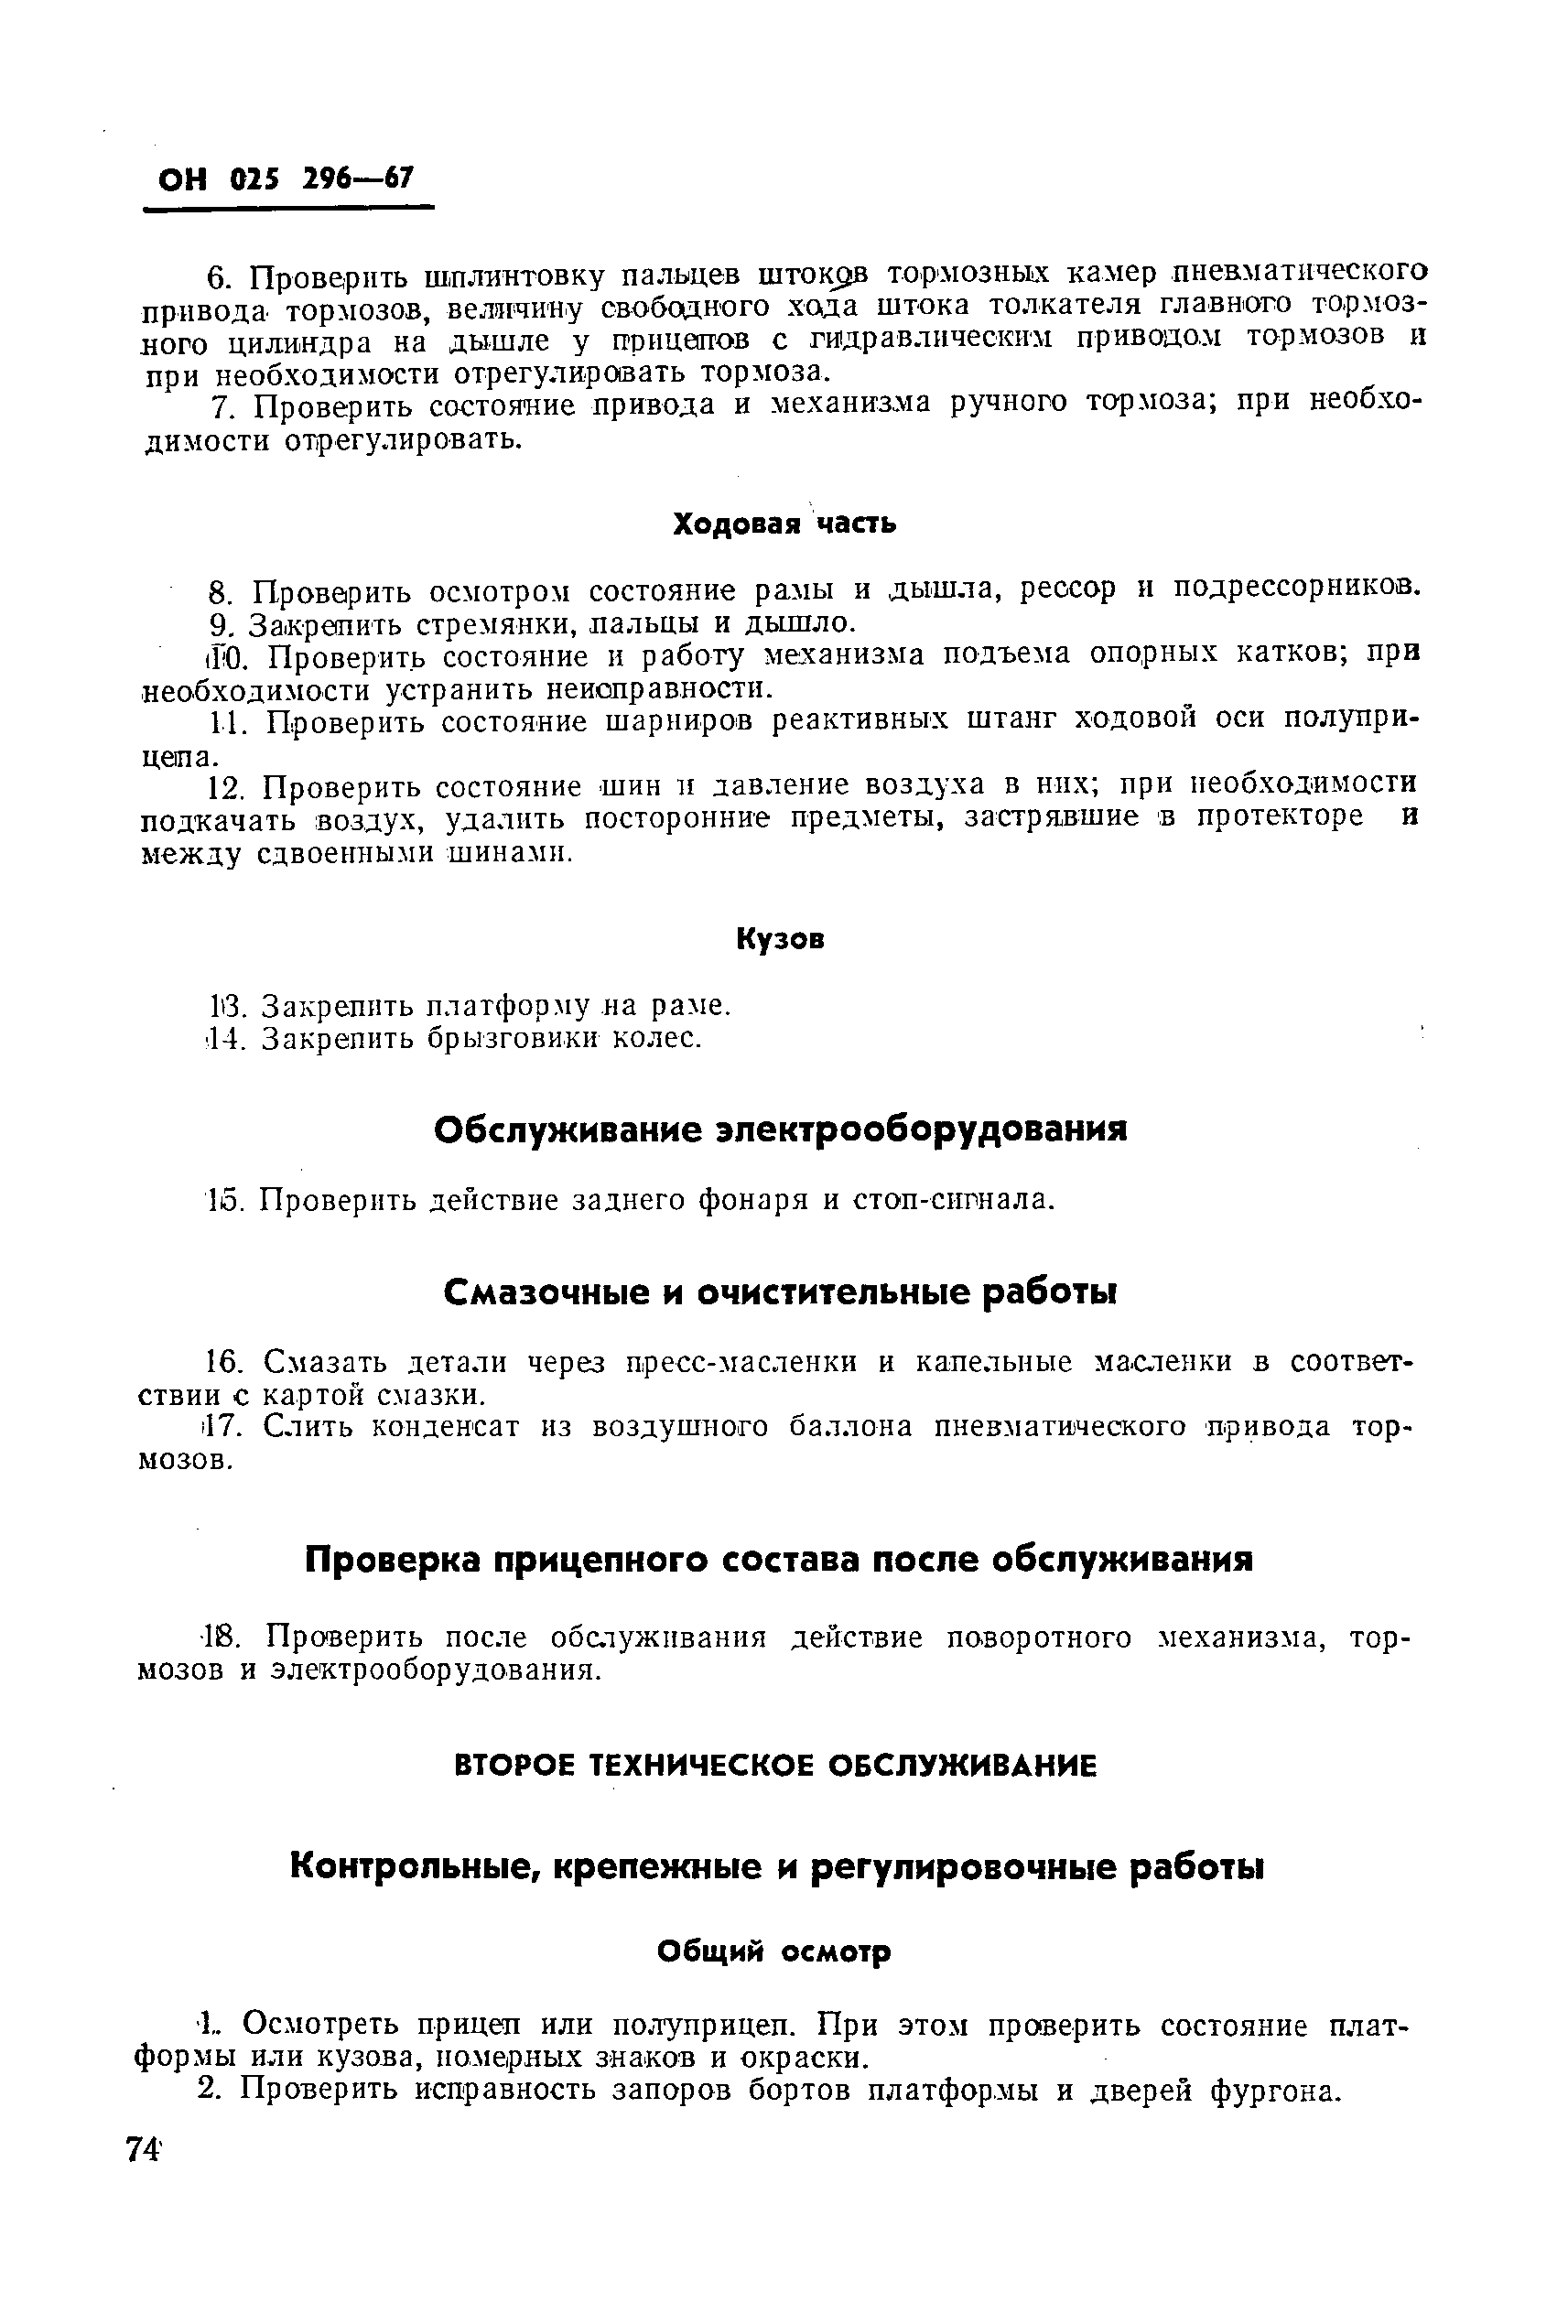 ОН 025 296-67*